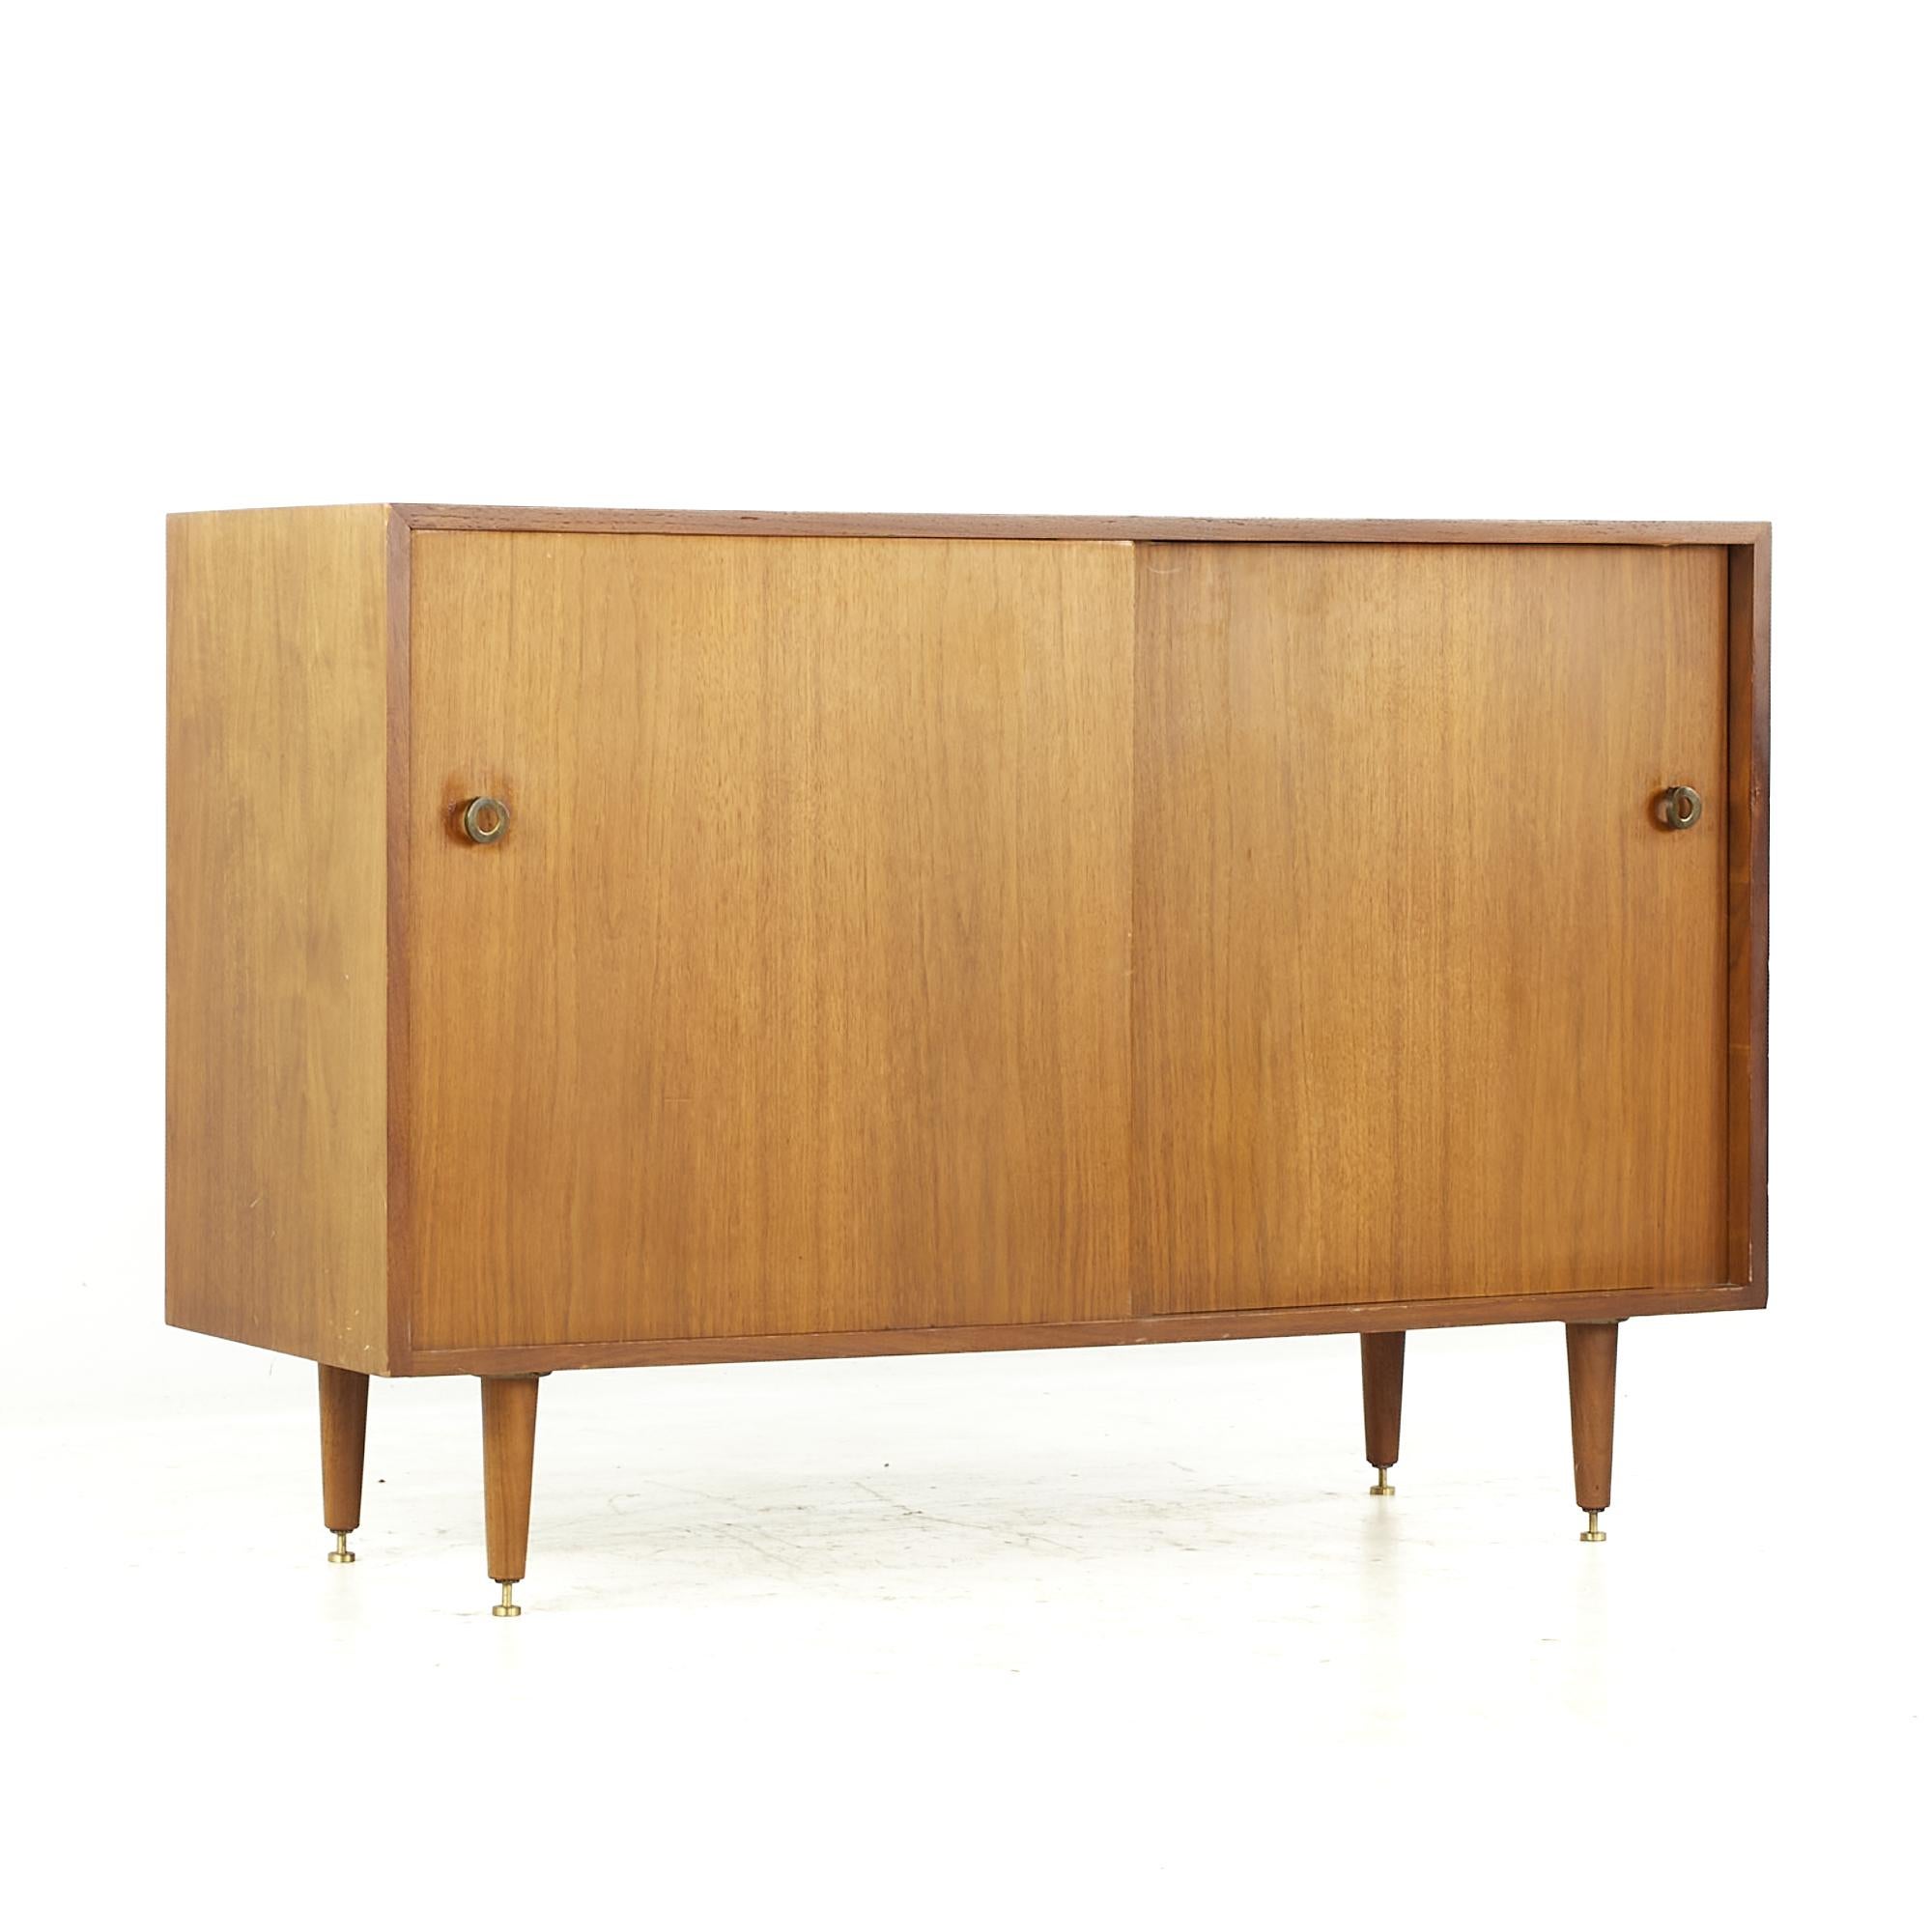 Milo Baughman for Glenn of California Midcentury Credenza, Pair In Good Condition For Sale In Countryside, IL